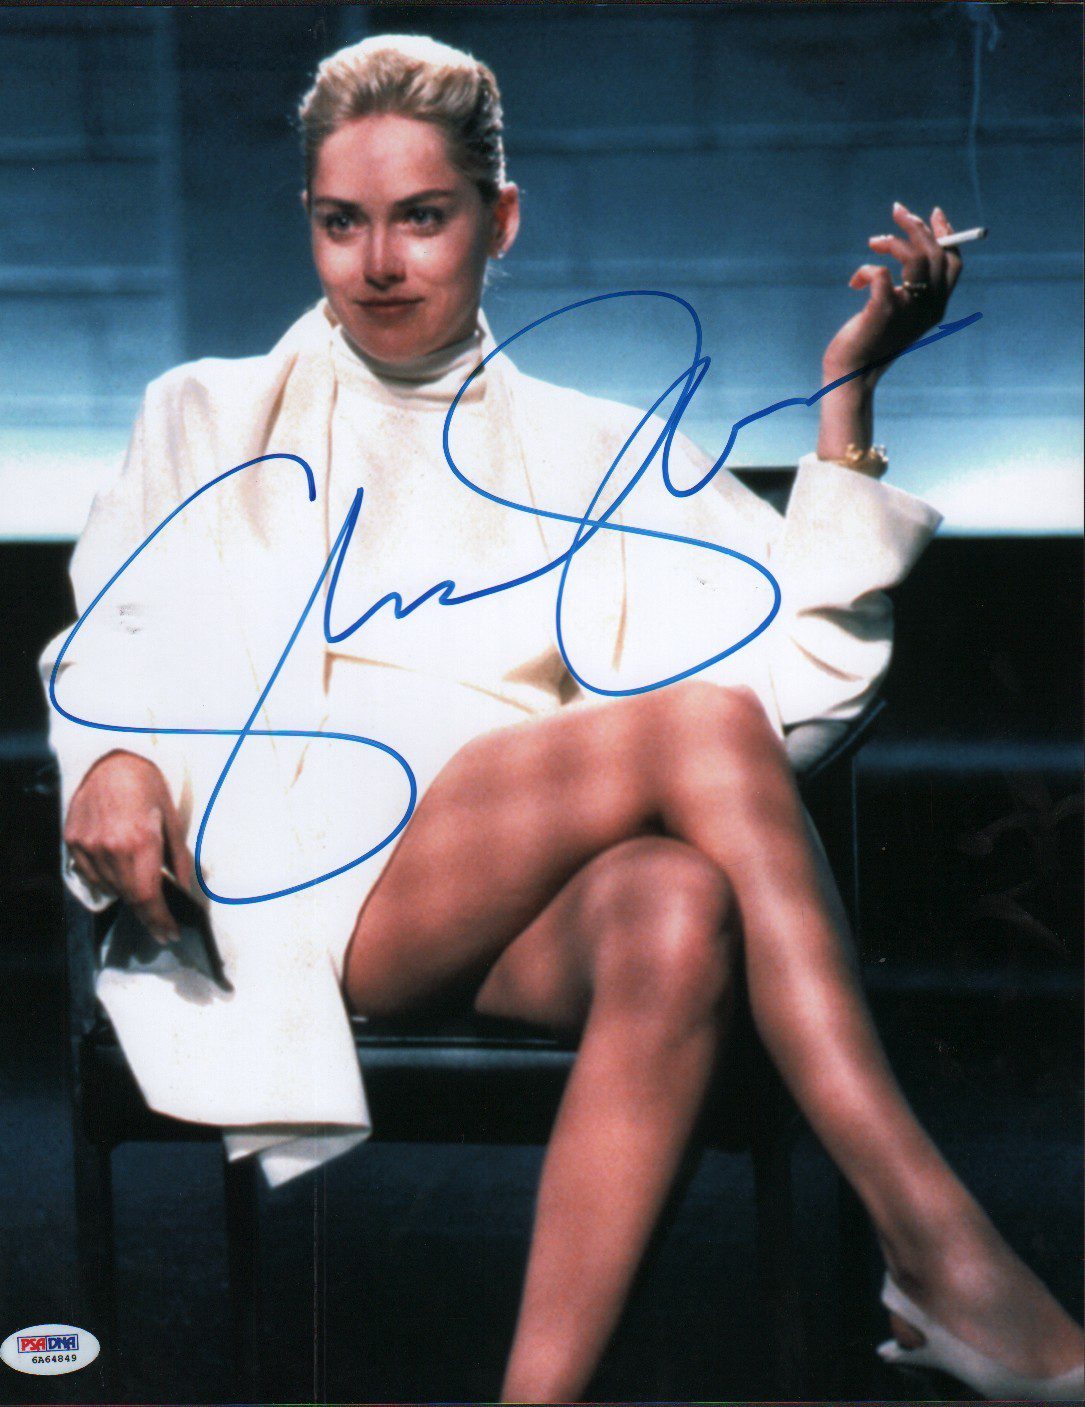 Movie Star Autograph for Sale